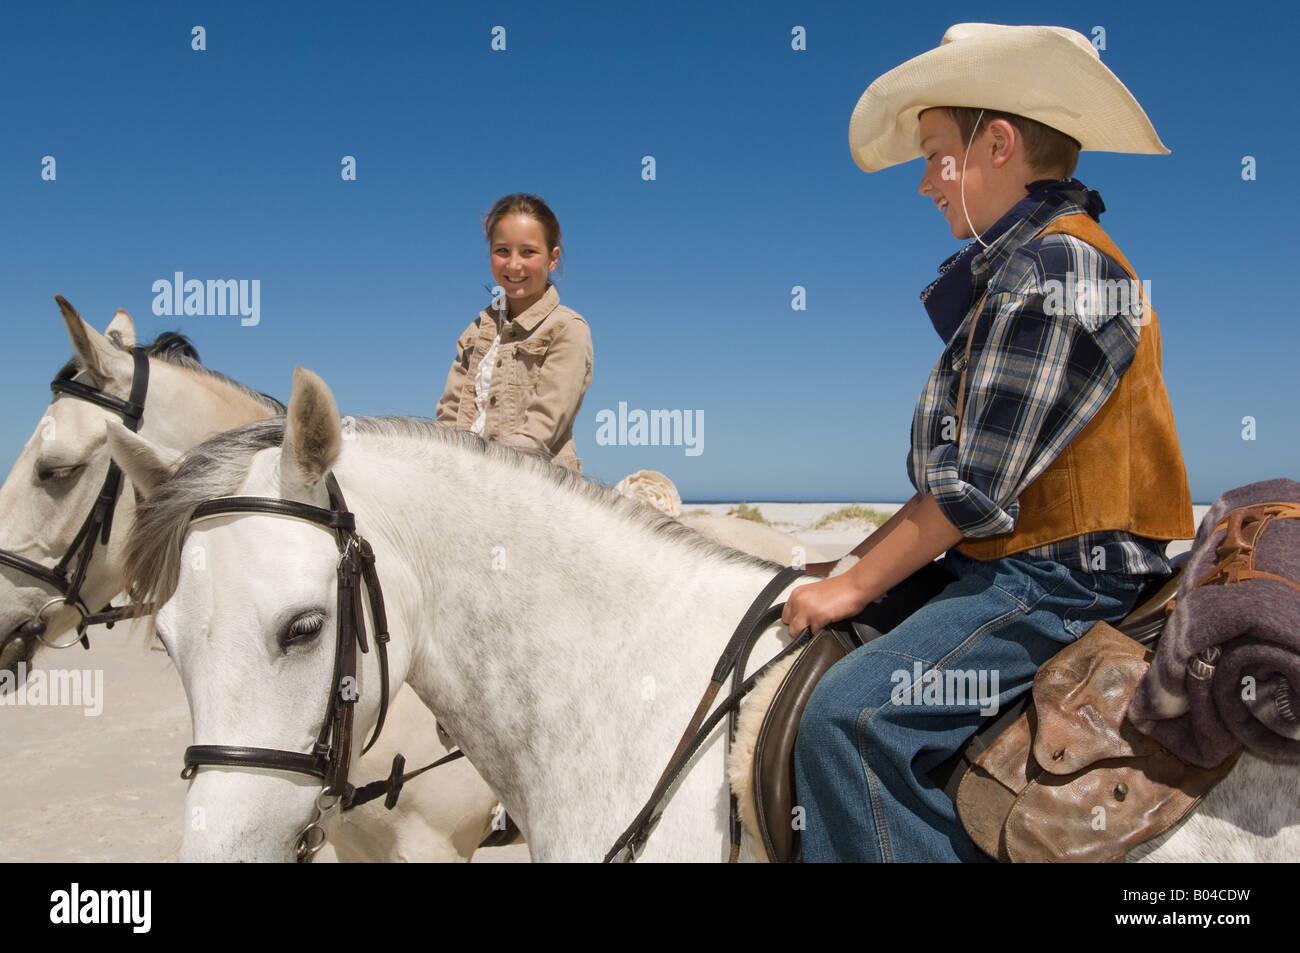 A boy and girl riding horses Stock Photo